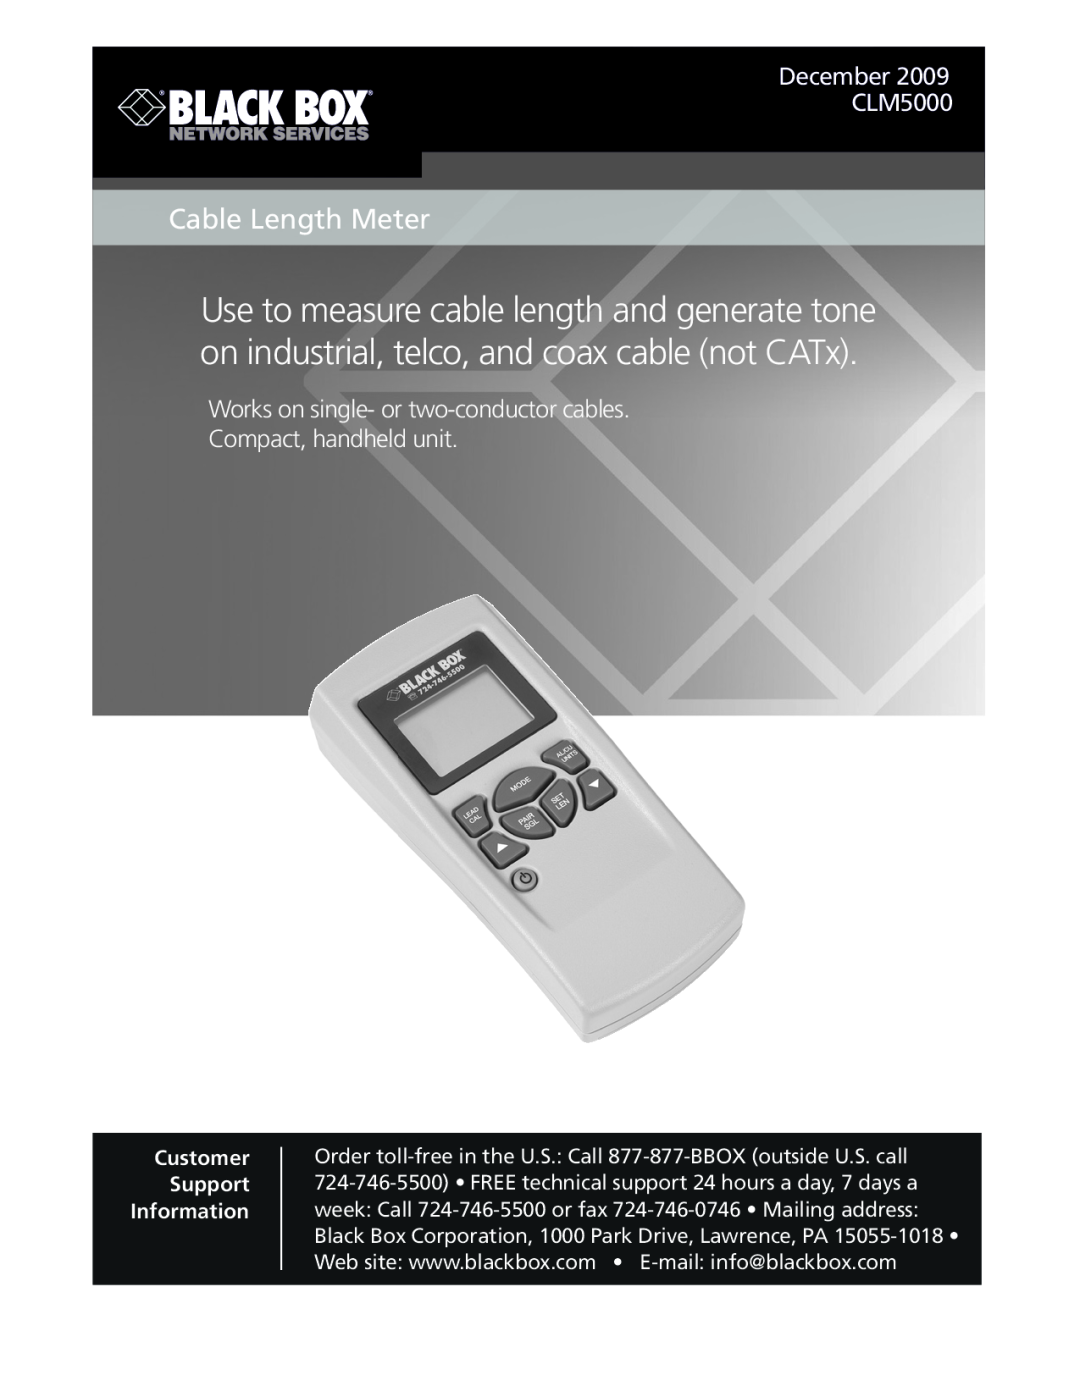 Black Box Cable Length Meter manual December CLM5000, Works on single- or two-conductorcables, Compact, handheld unit 